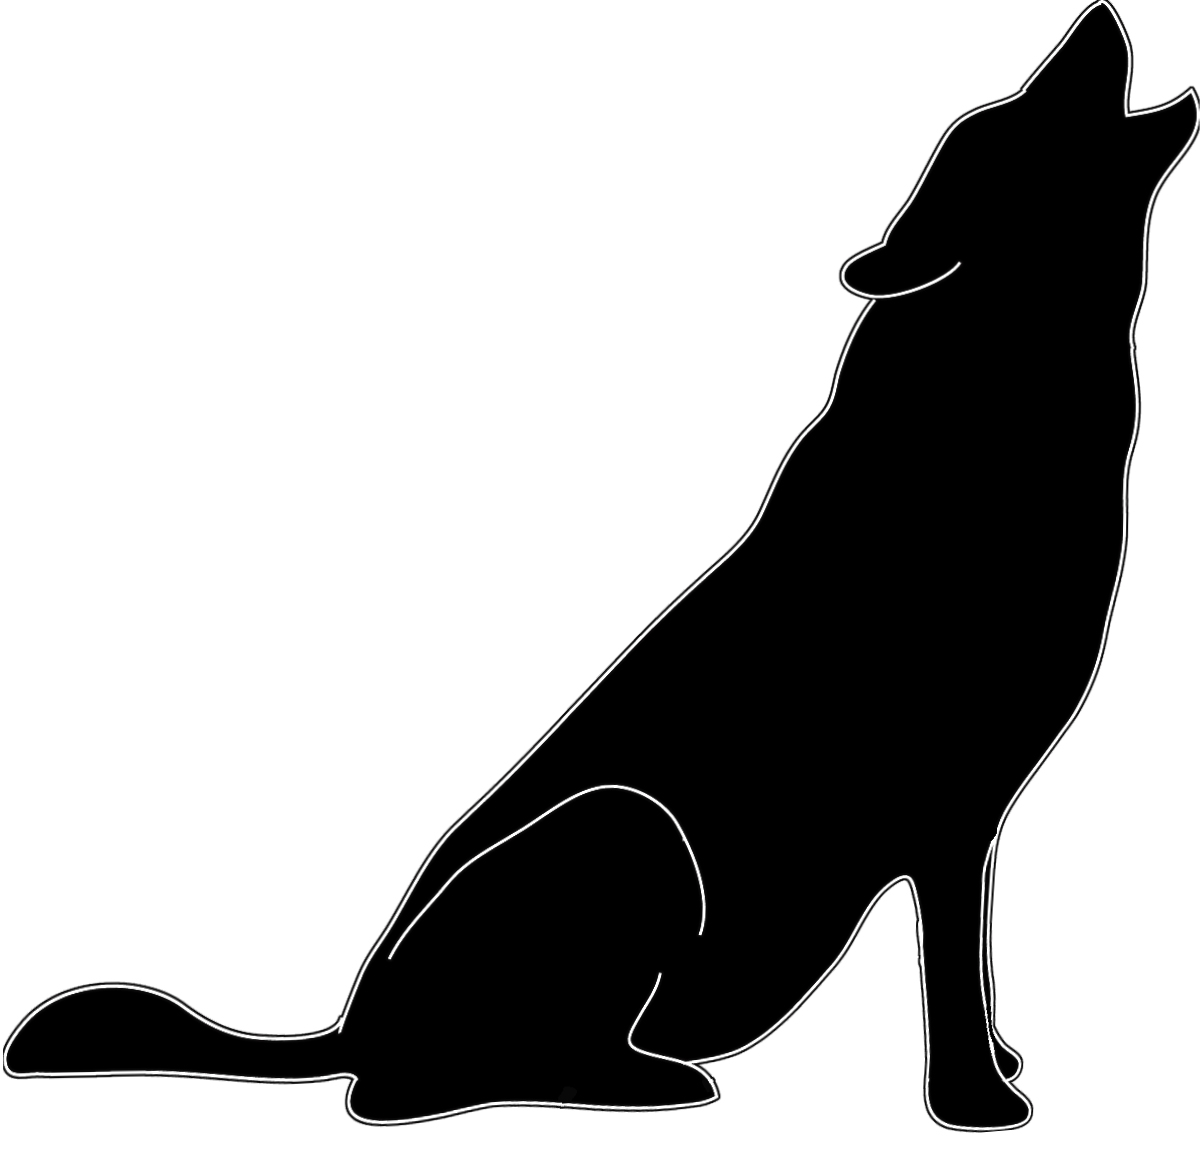 clipart hound howling